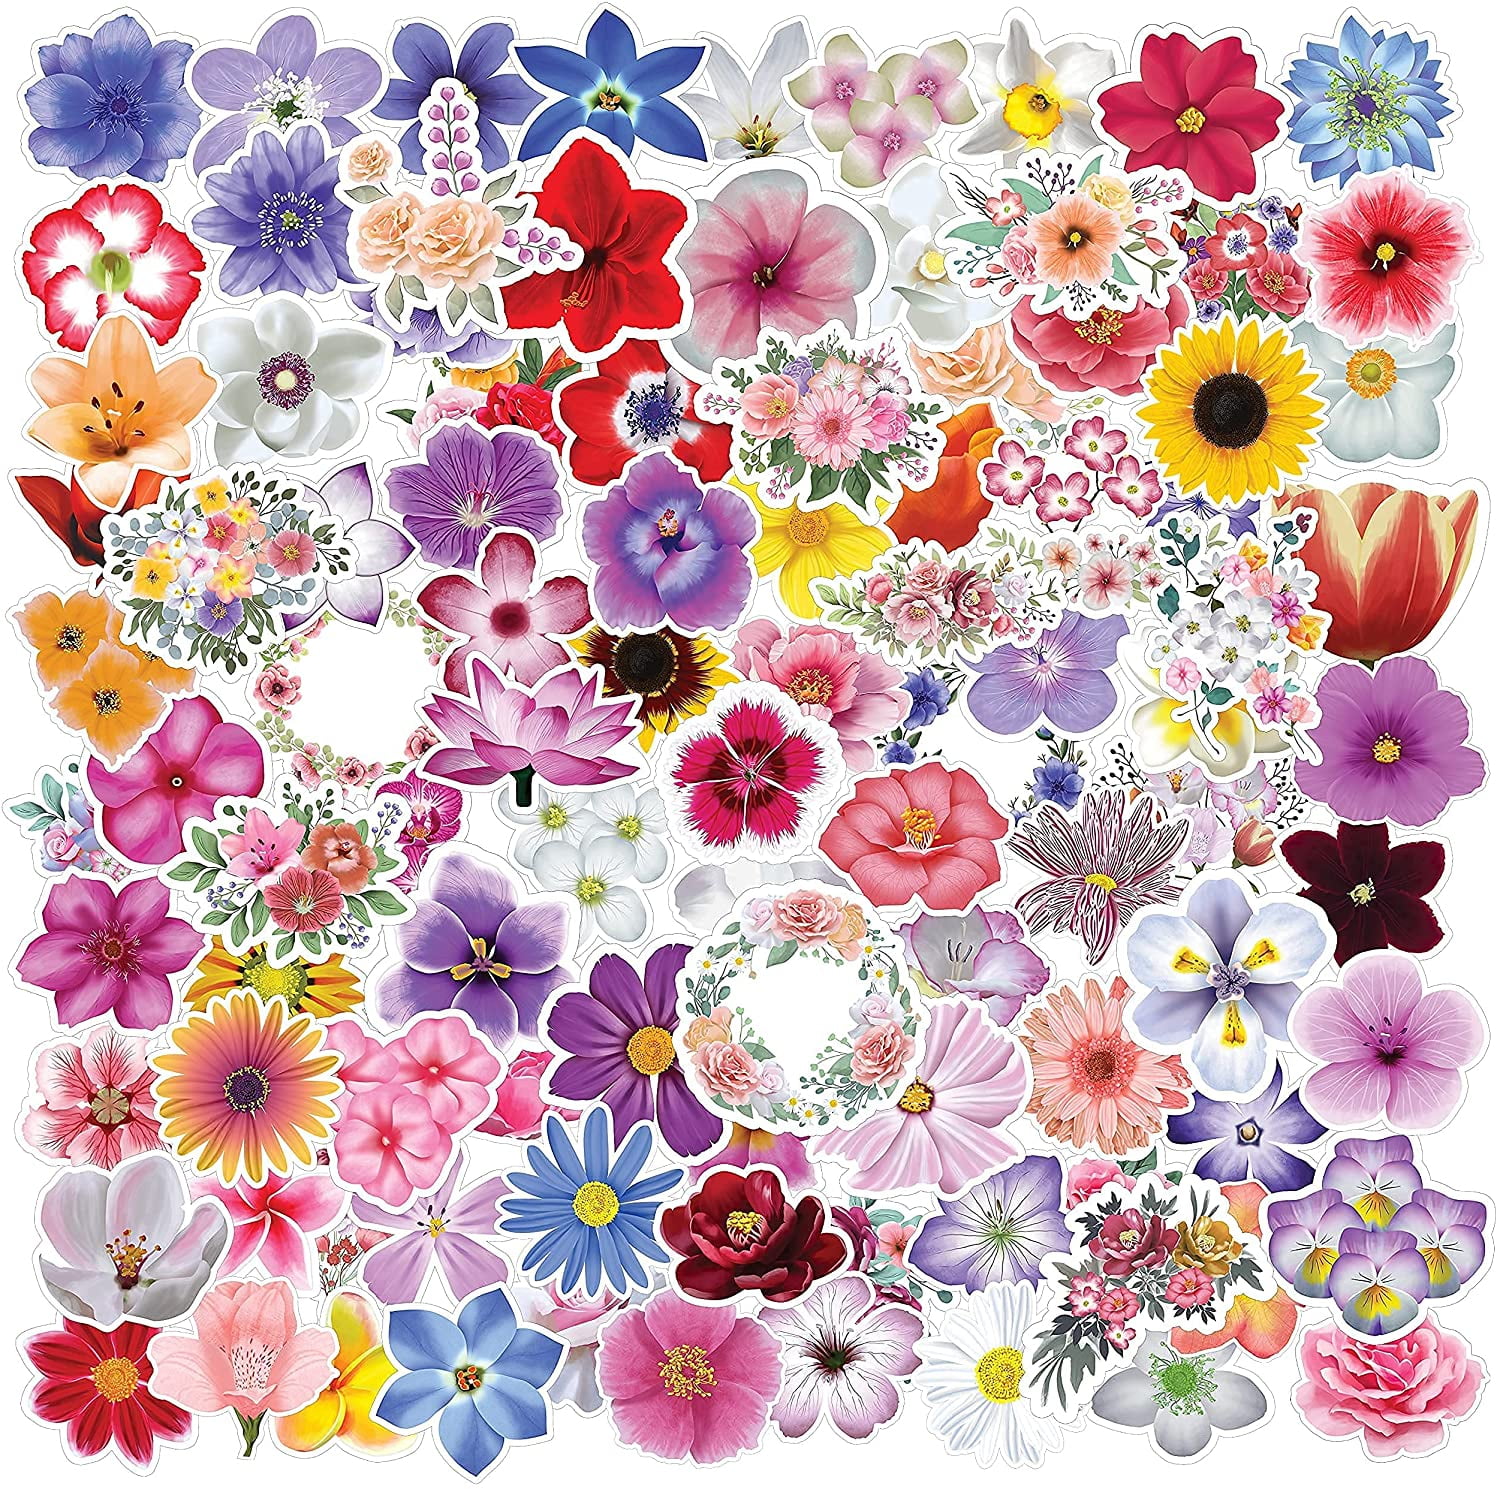 100 Flower Stickers, Floral Sticker Pack for Scrapbook, Laptop, Aesthetic  Waterproof Stickers, Vinyl Stickers for Teens Girls Kids, Notebook  Stickers